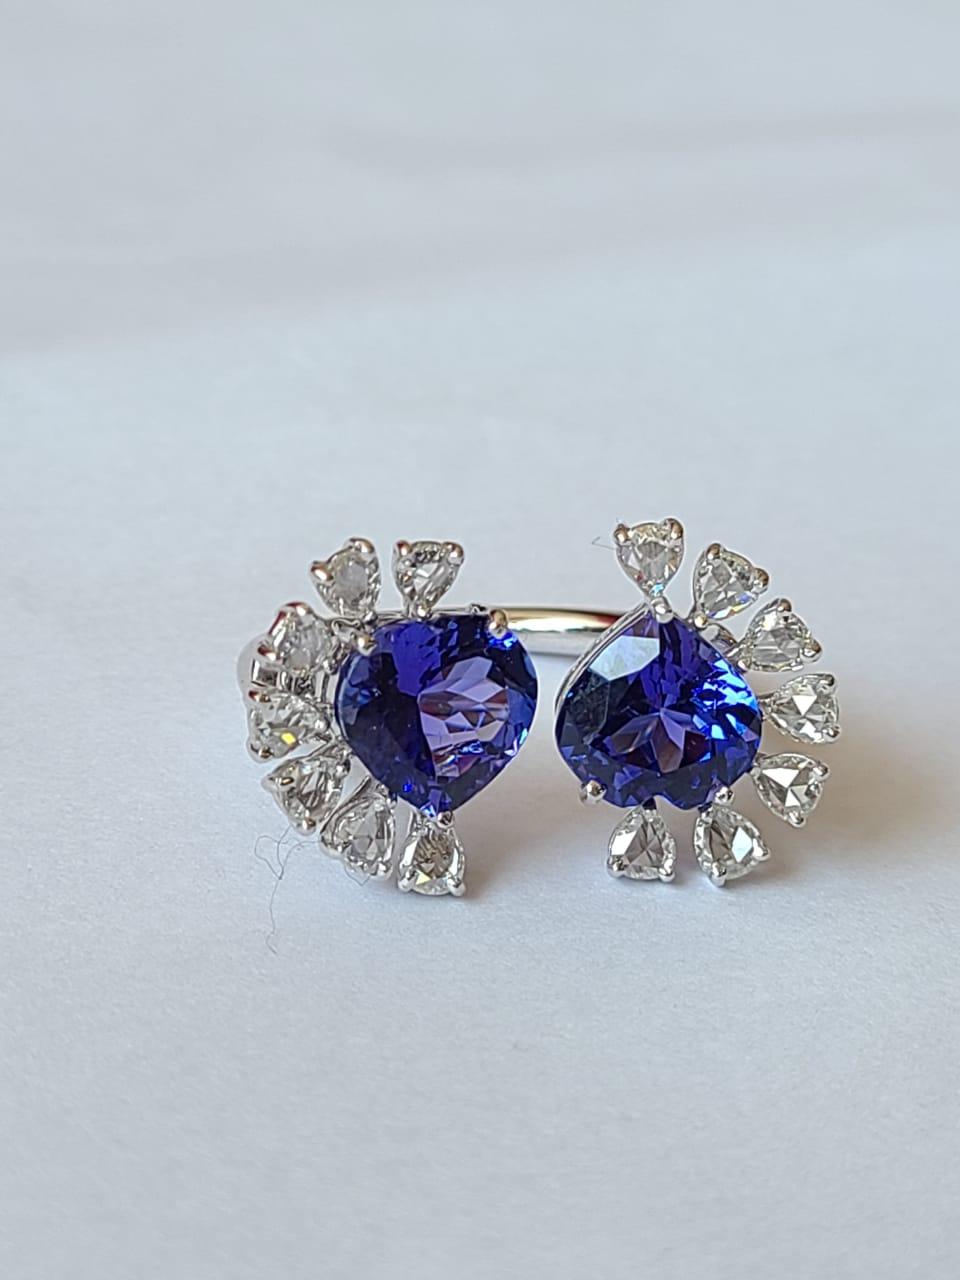 Set in 18K White Gold, Tanzanite & Rose Cut Diamonds Cocktail/ Engagement Ring For Sale 4